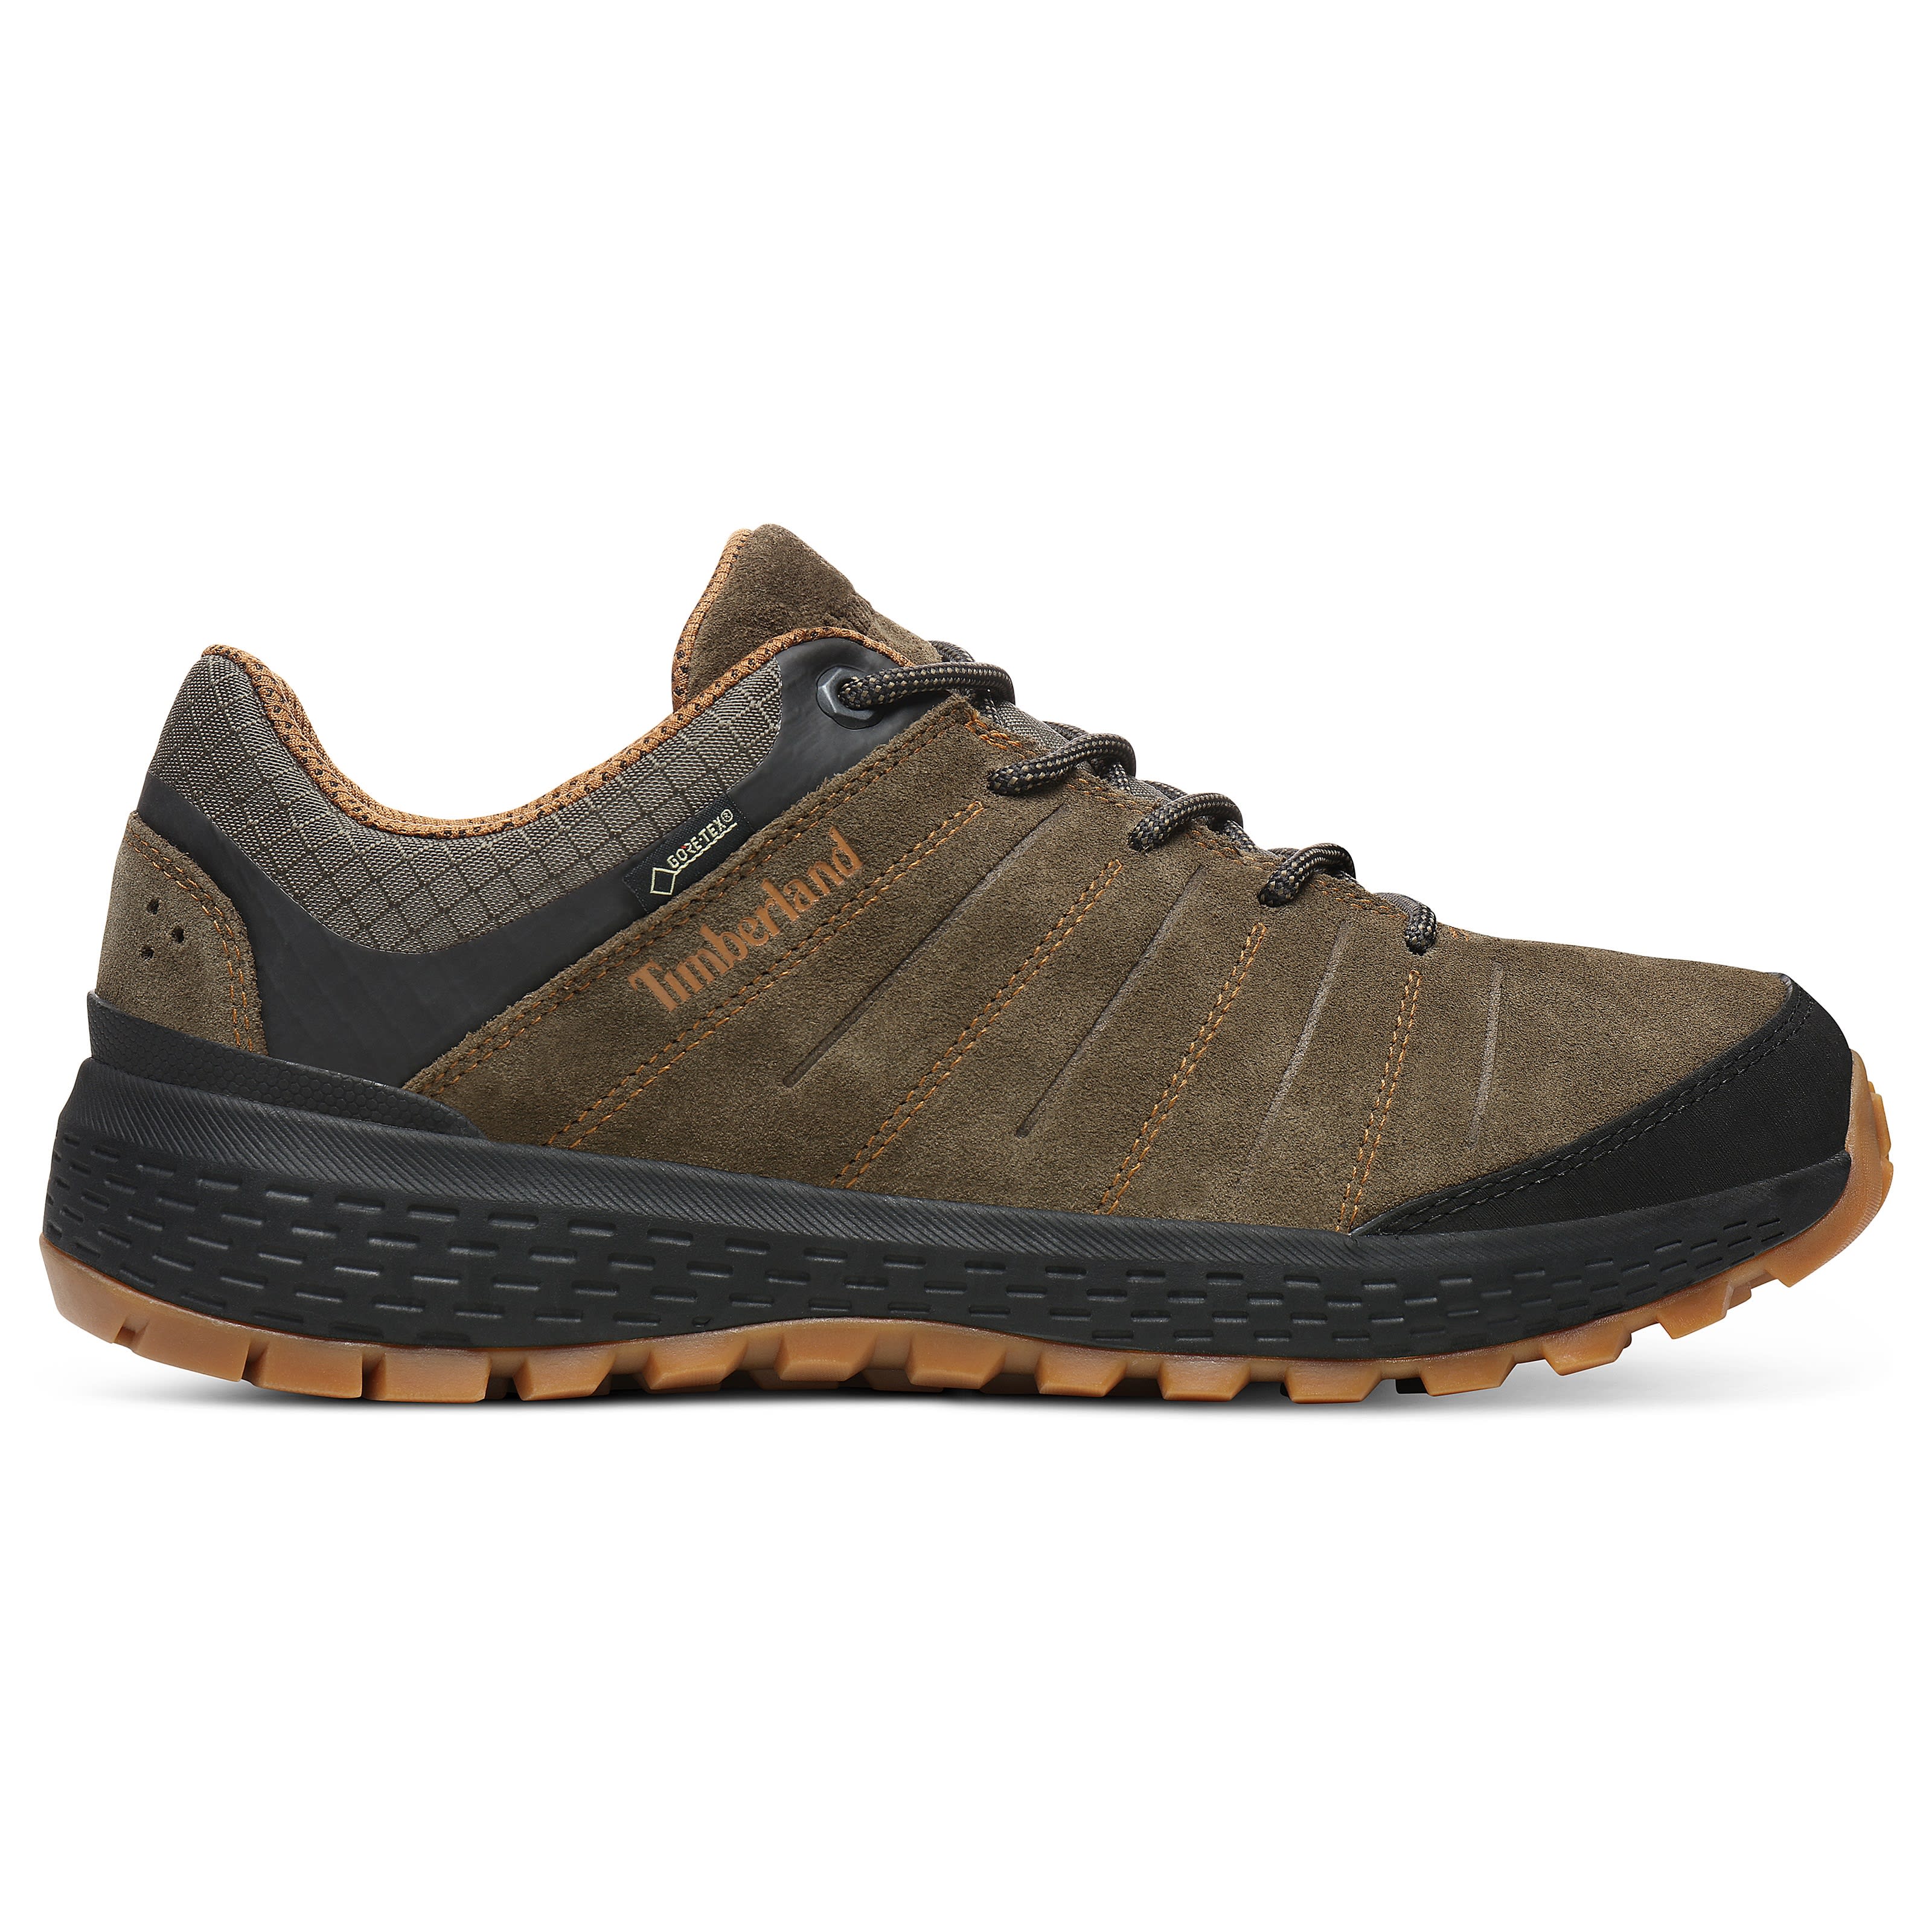 Jabeth Wilson gebed Sovjet Buy Timberland Men's Parker Ridge Low Gore-Tex from Outnorth